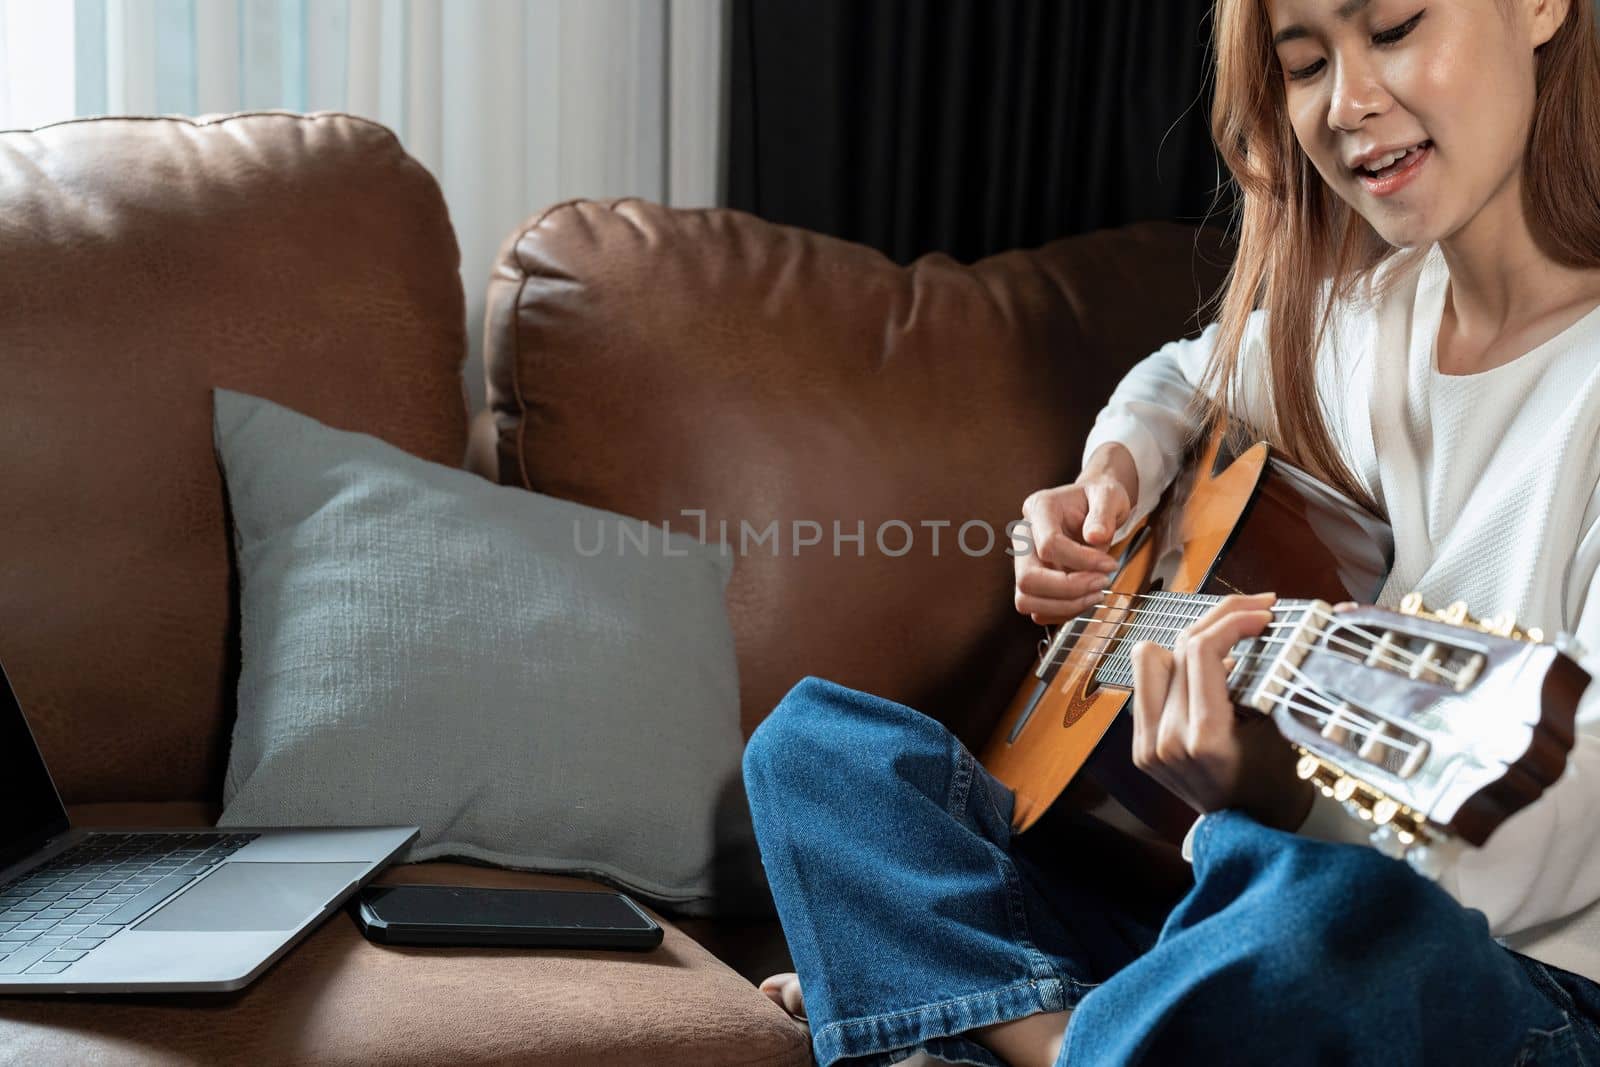 Image of happy beautiful woman playing guitar and composing song.